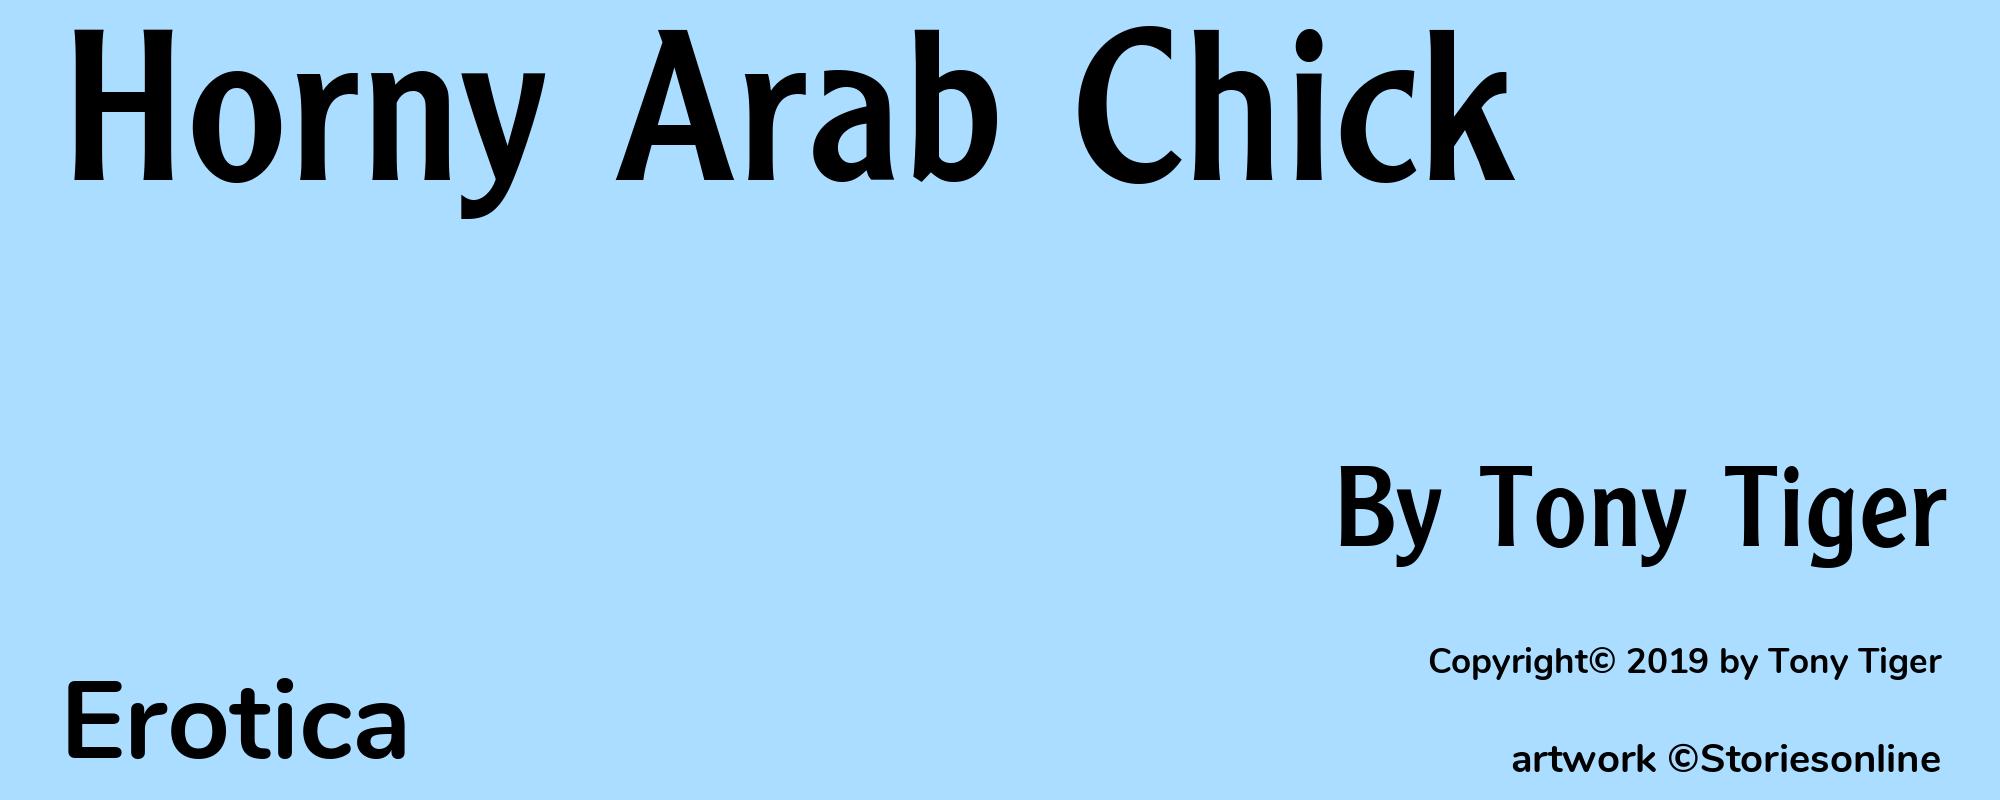 Horny Arab Chick - Cover